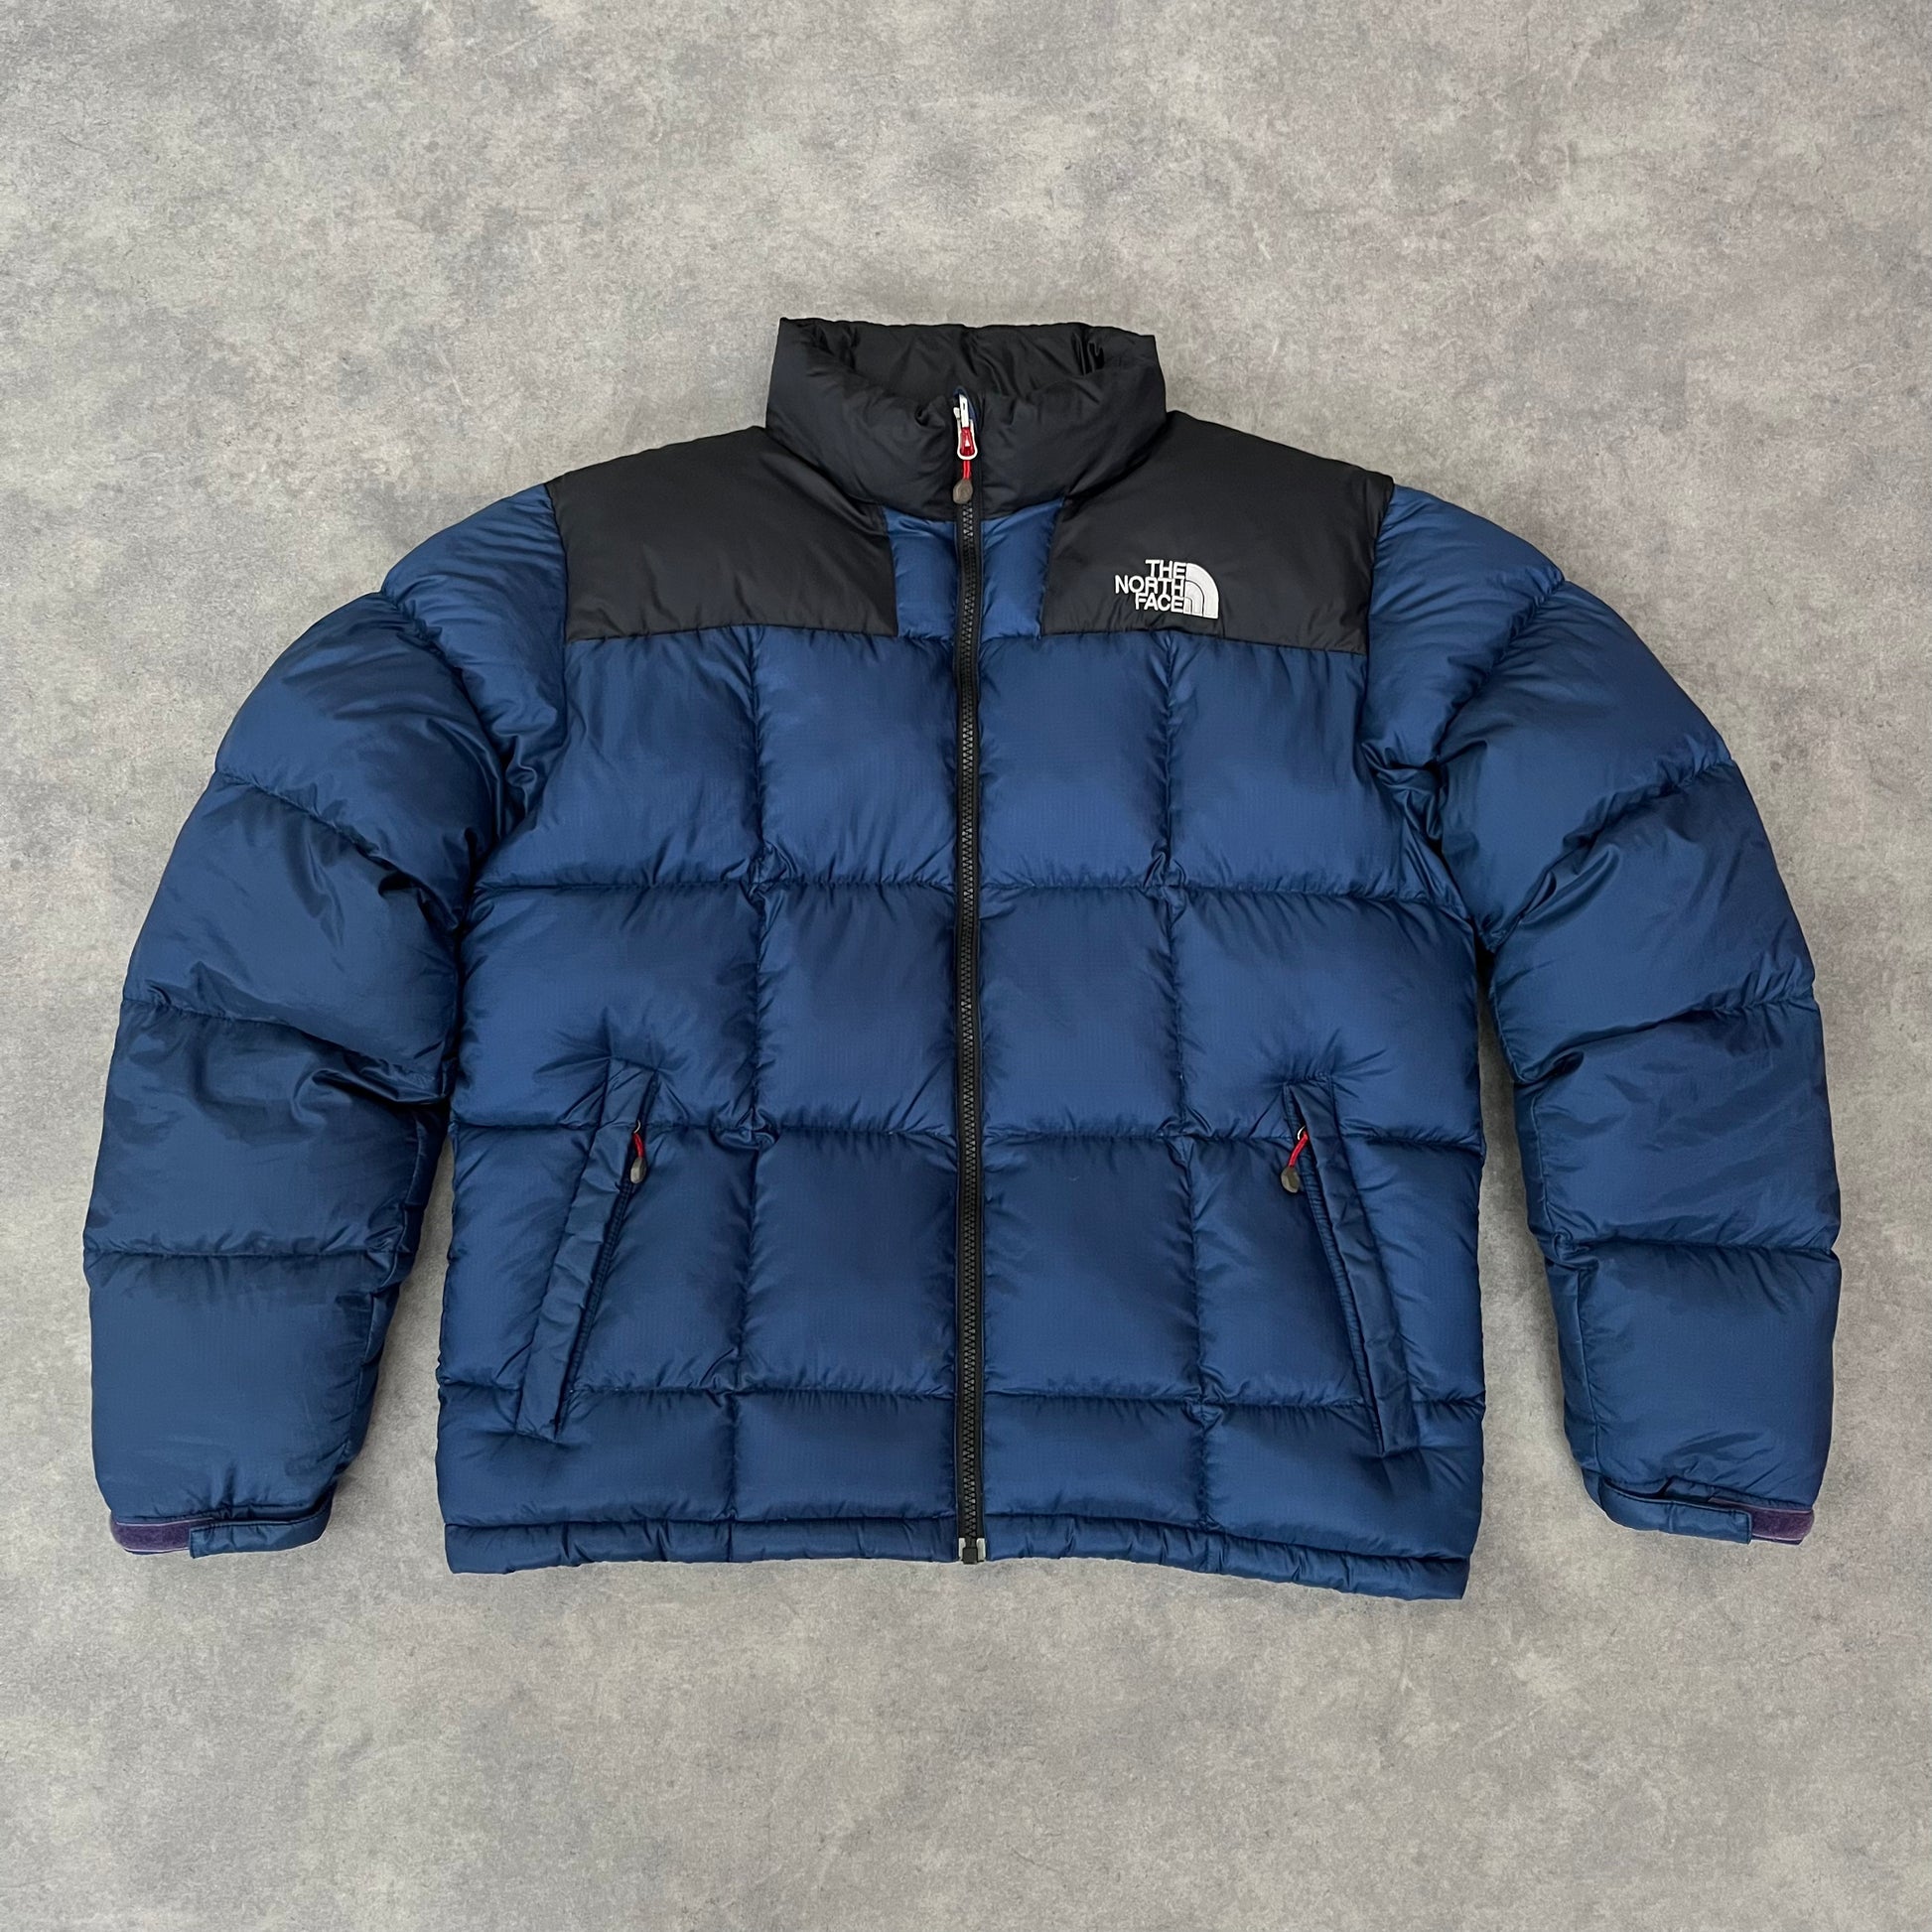 Doudoune The North Face 800 – Wefrip Vintage